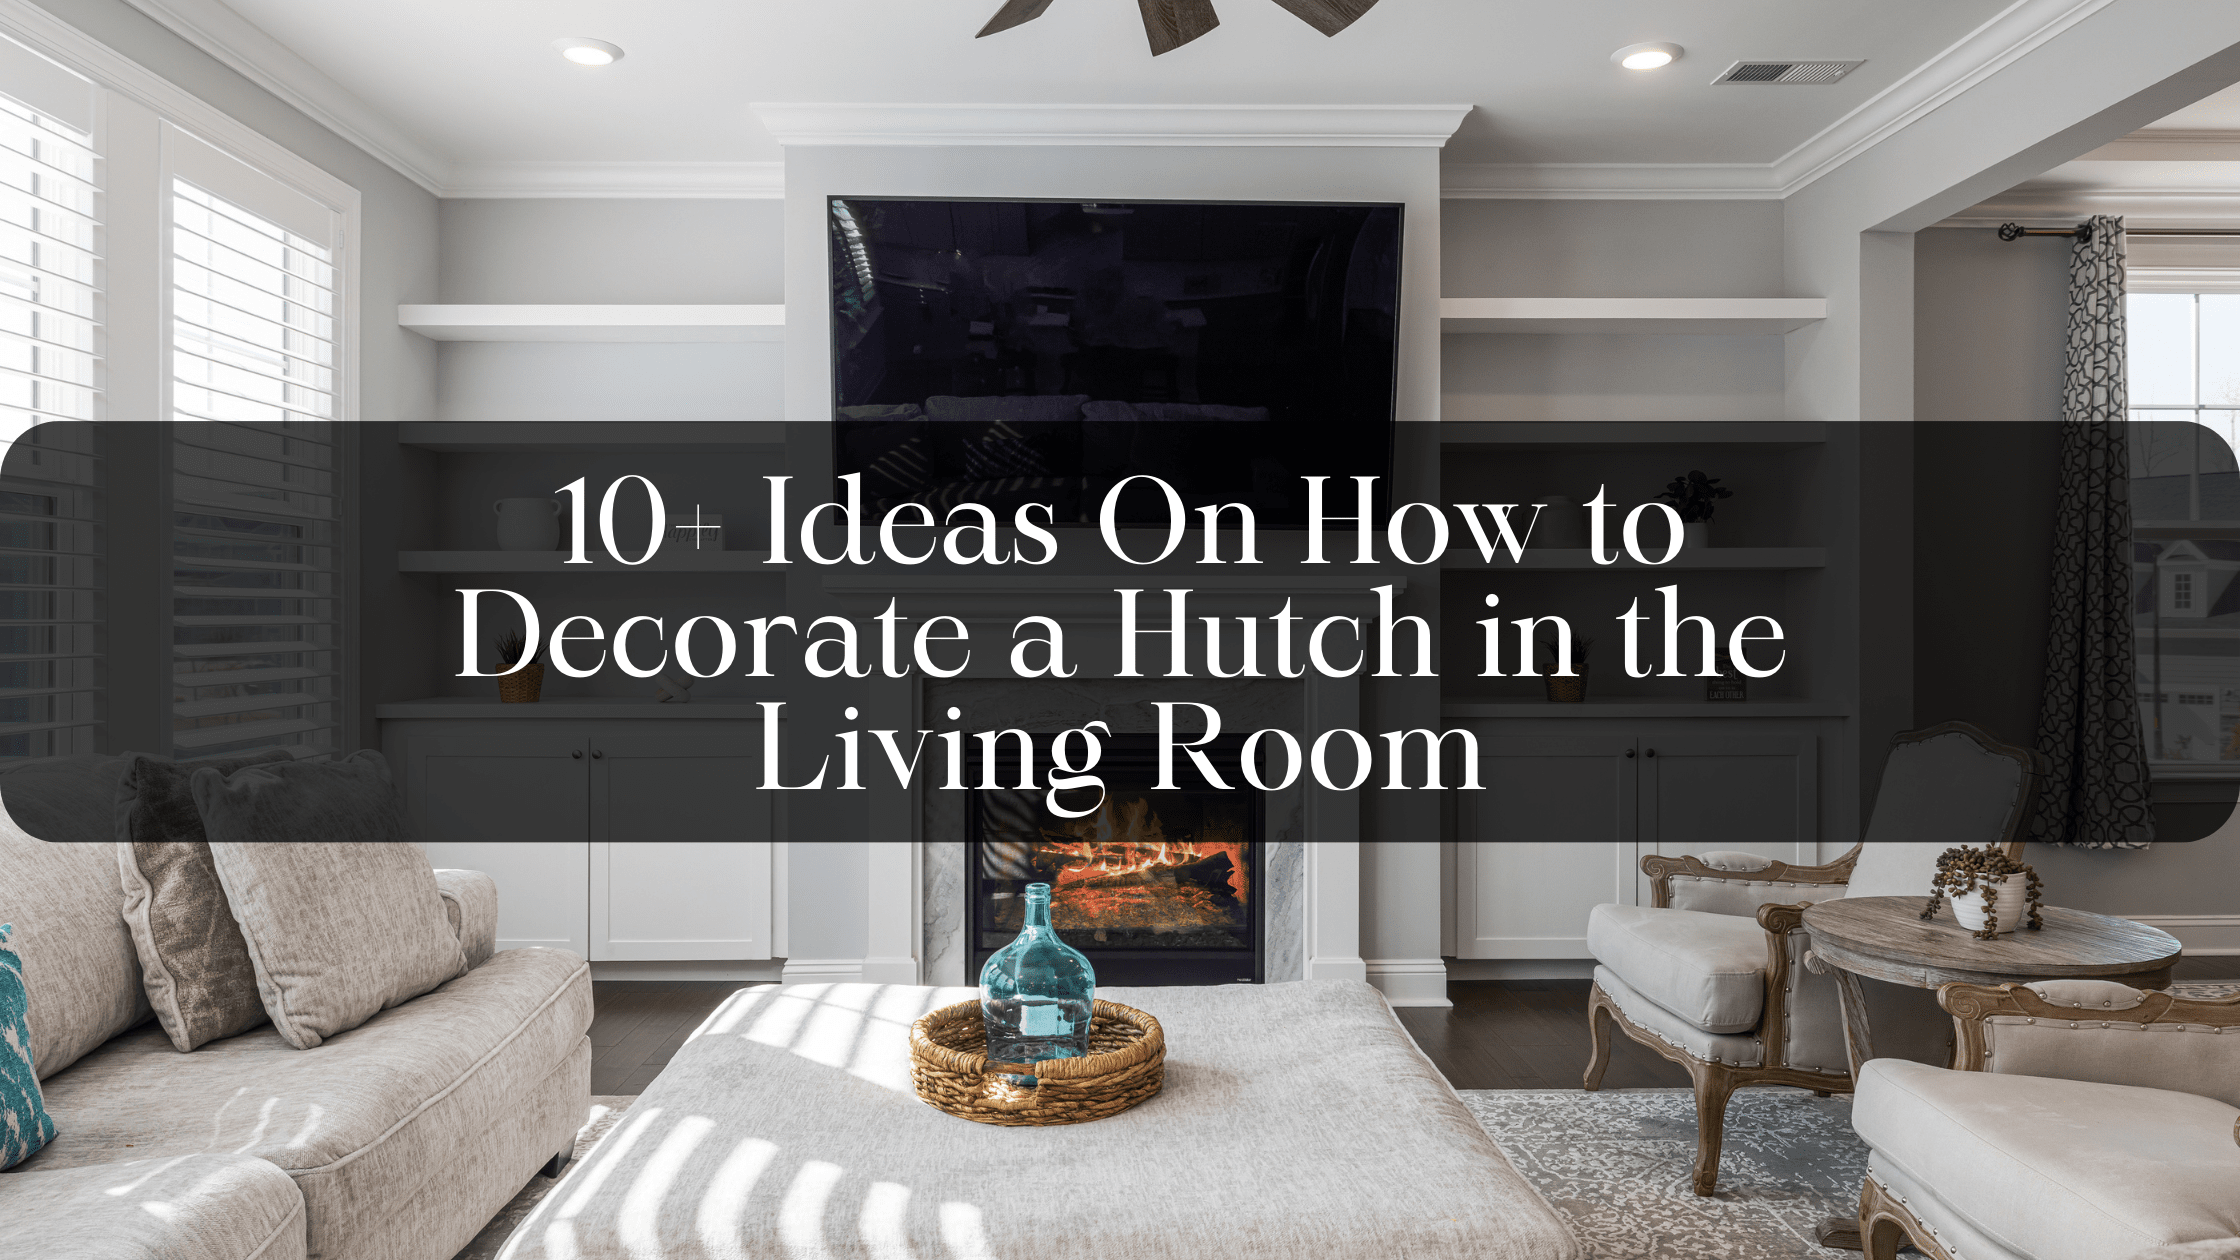 How to Decorate a Hutch in the Living Room